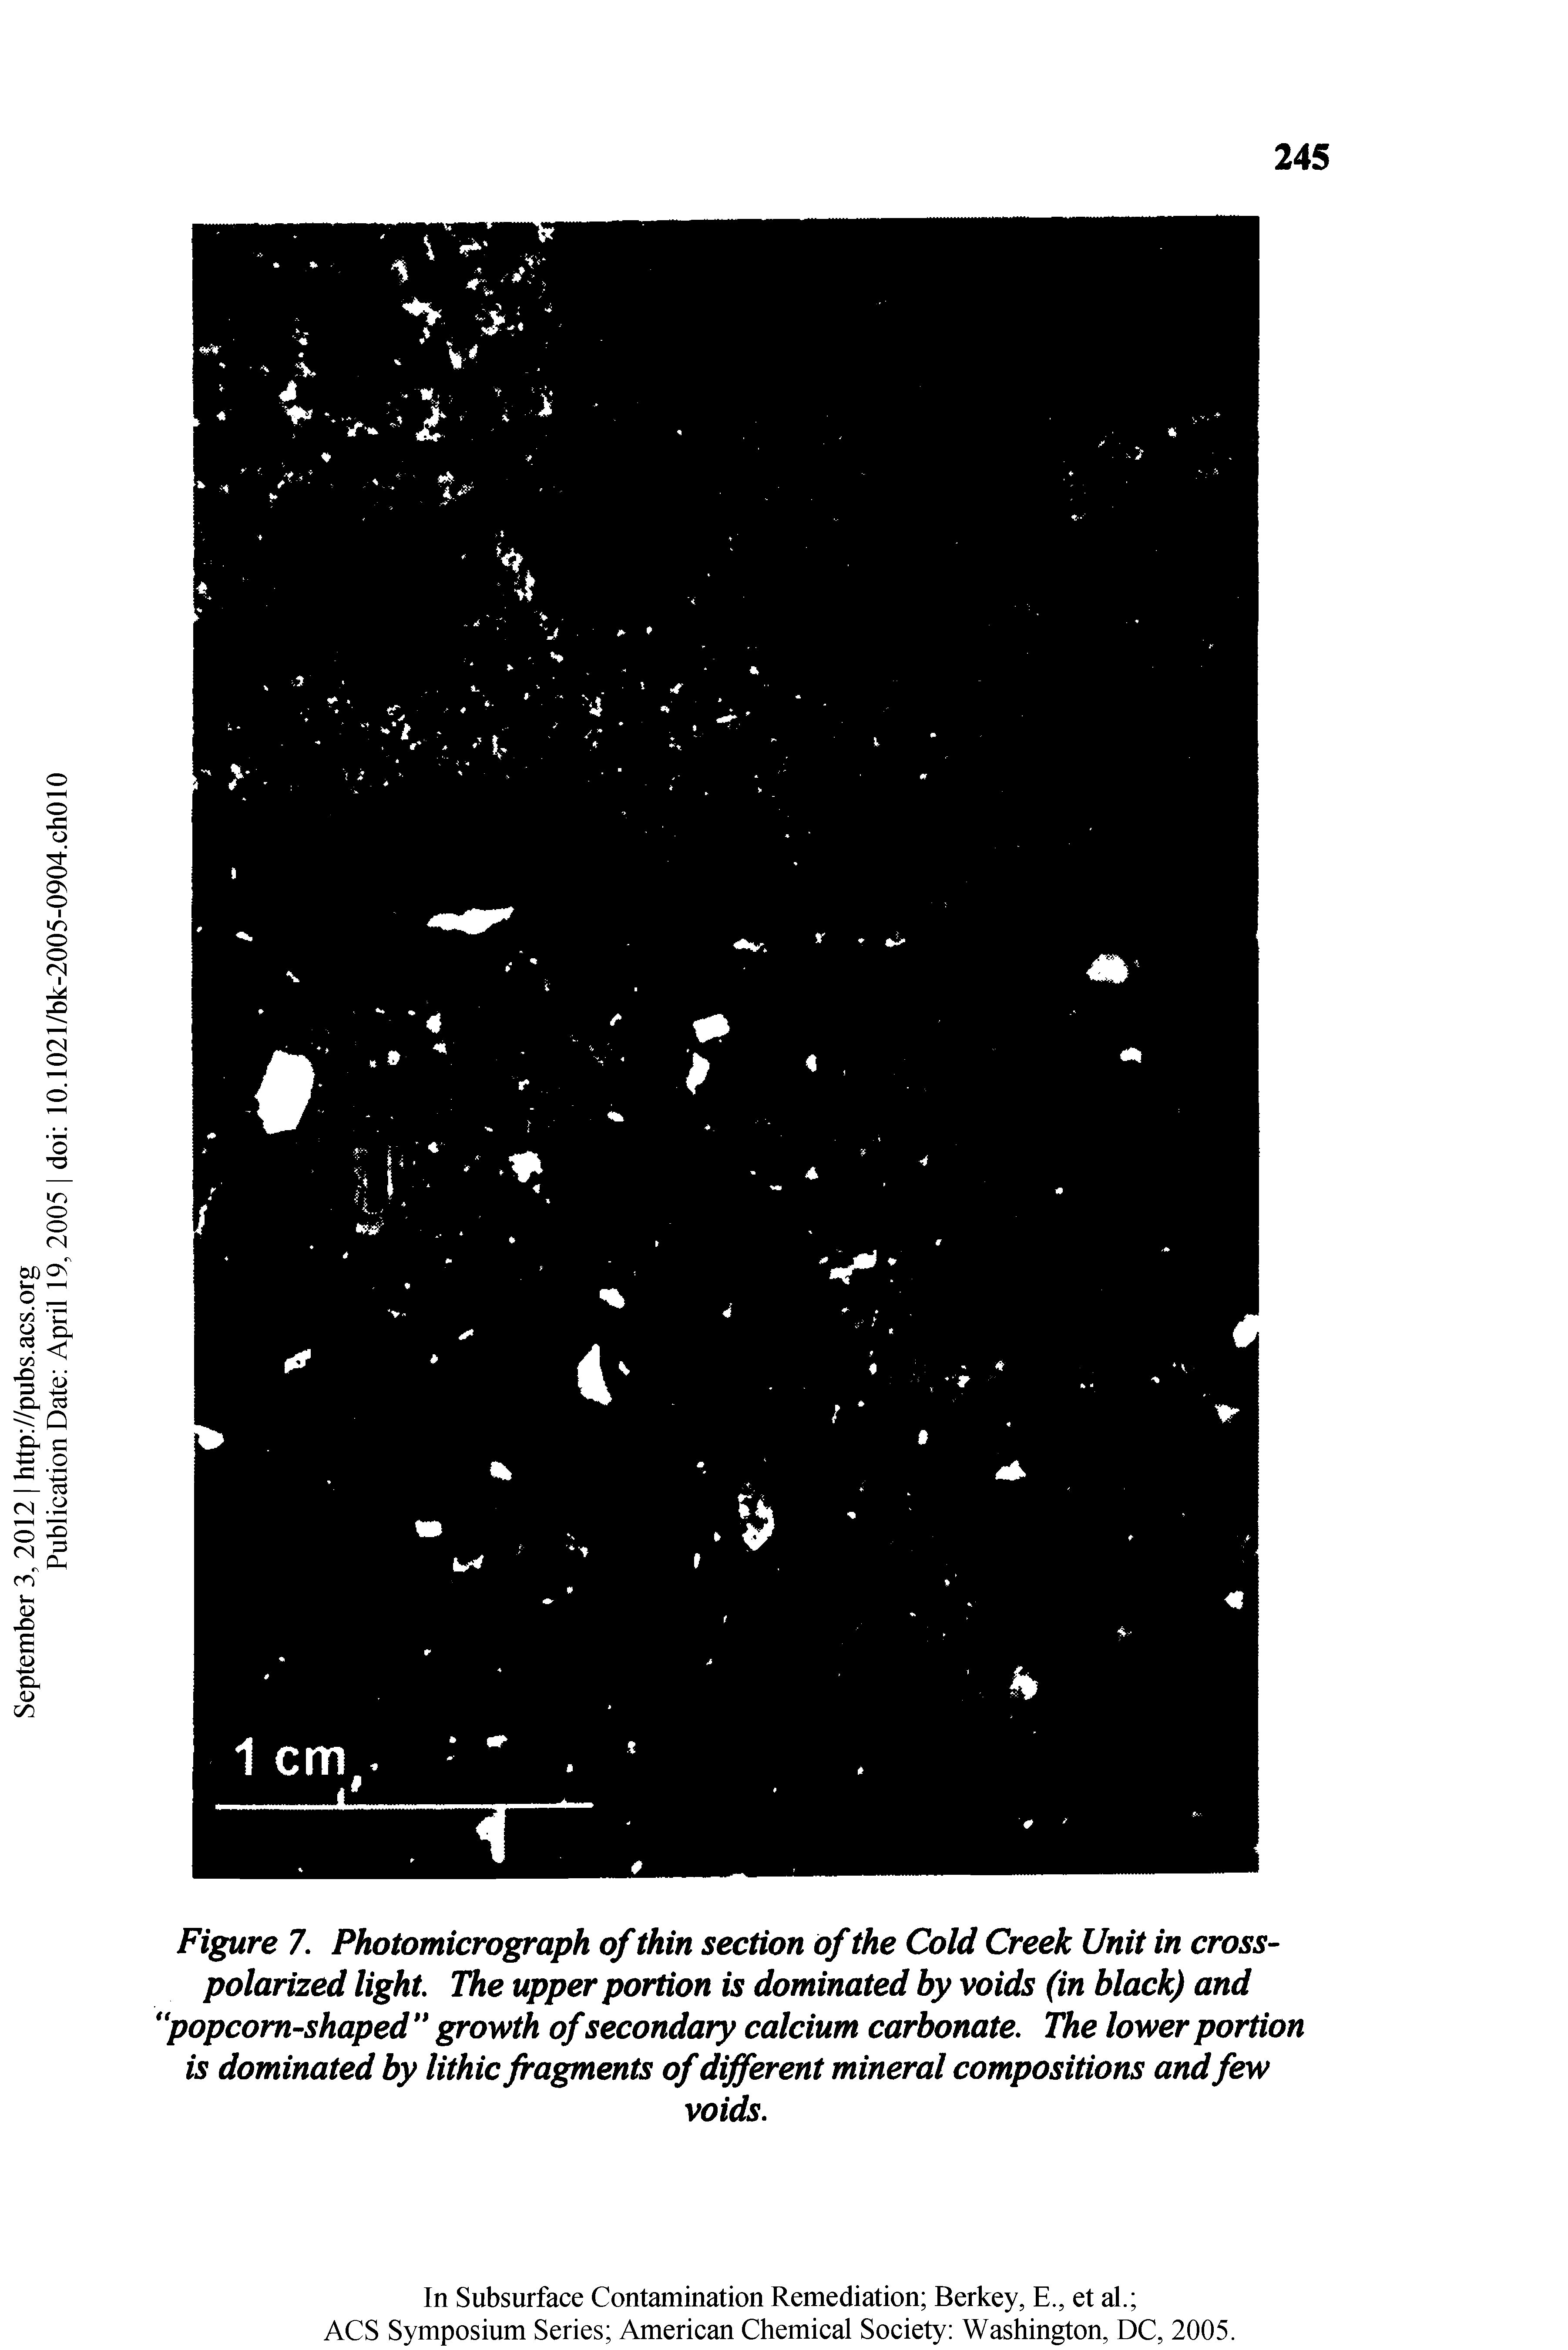 Figure 7. Photomicrograph of thin section of the Cold Creek Unit in cross-polarized light The upper portion is dominated by voids (in black) and popcom-shaped growth of secondary calcium carbonate. The lower portion is dominated by lithic fragments of different mineral compositions and few...